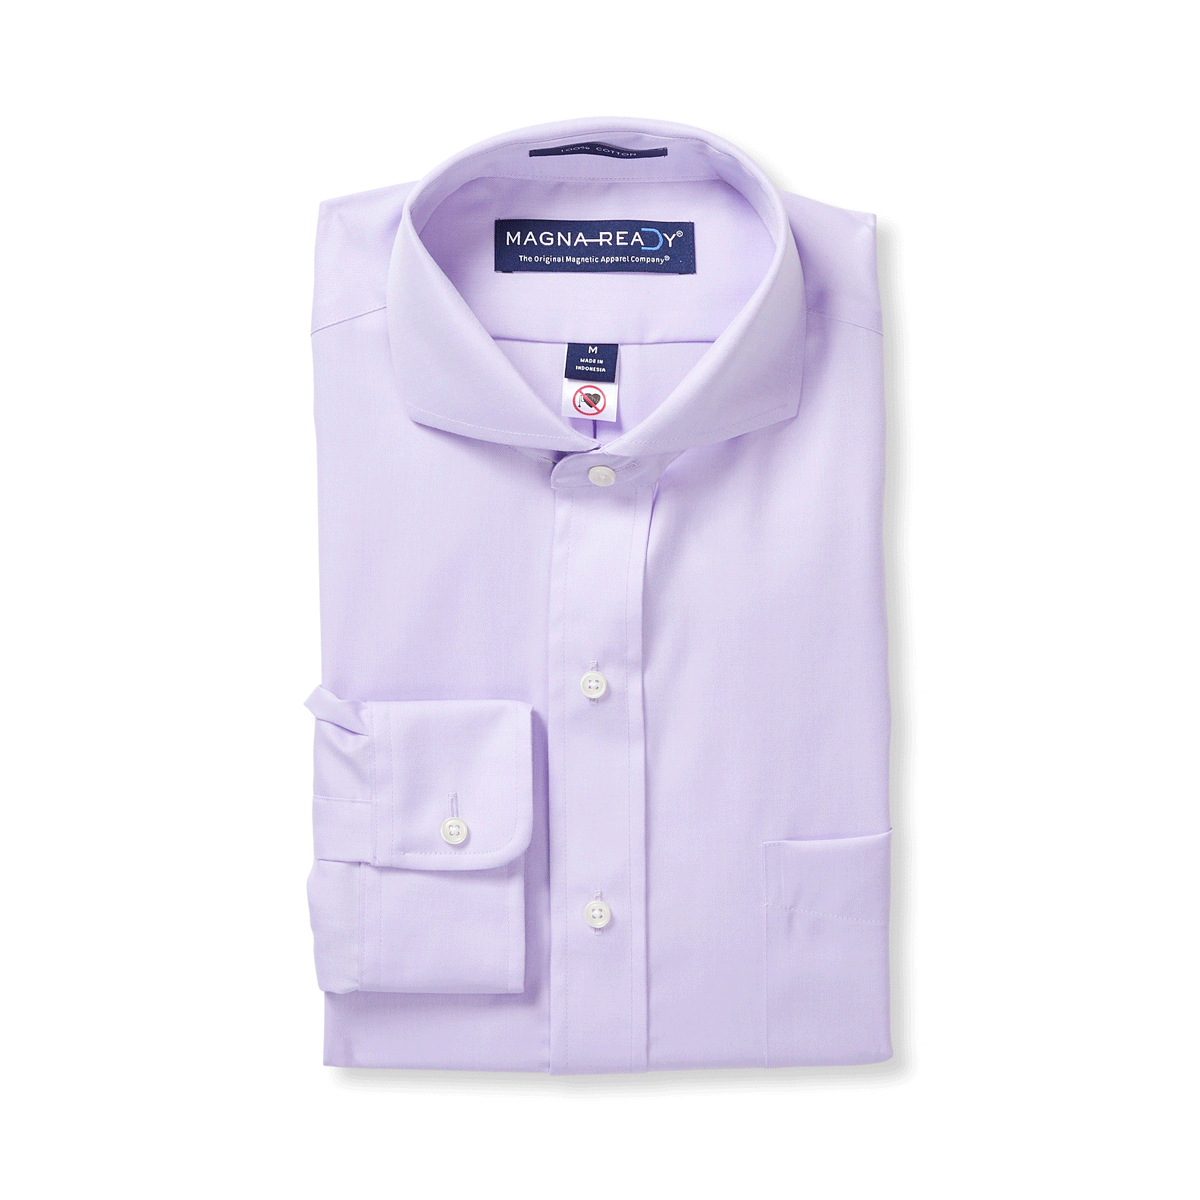 Long Sleeve Lavender ‘Bryant’ Shirt with Magnetic Closures